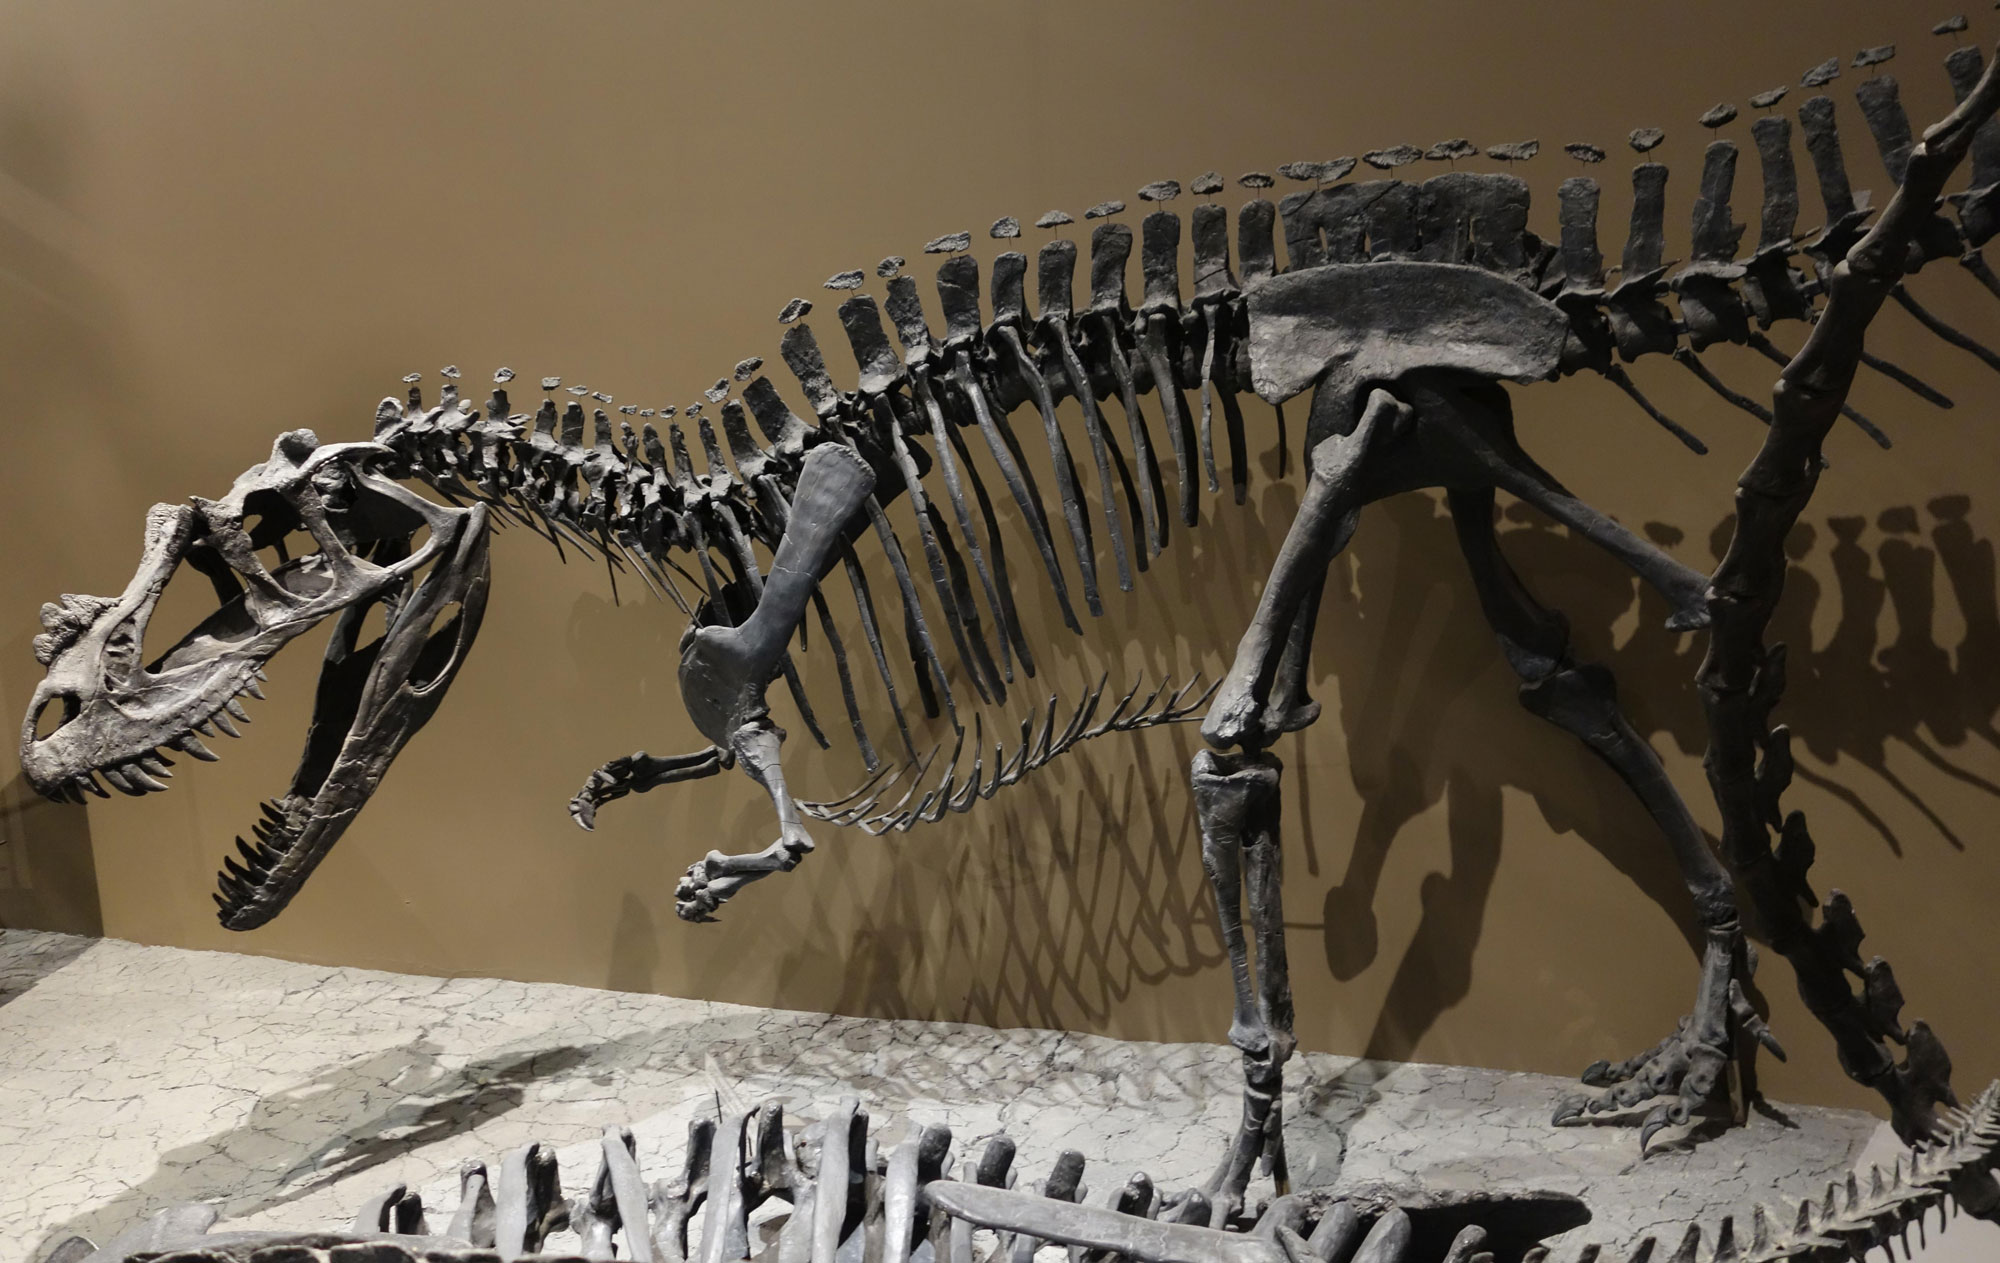 Photograph of a skeleton of Ceratosaurs on display at a museum. Ceratosaurus is a predatory dinosaur that walked on two legs. Its skull has a distinctive short nasal horn.